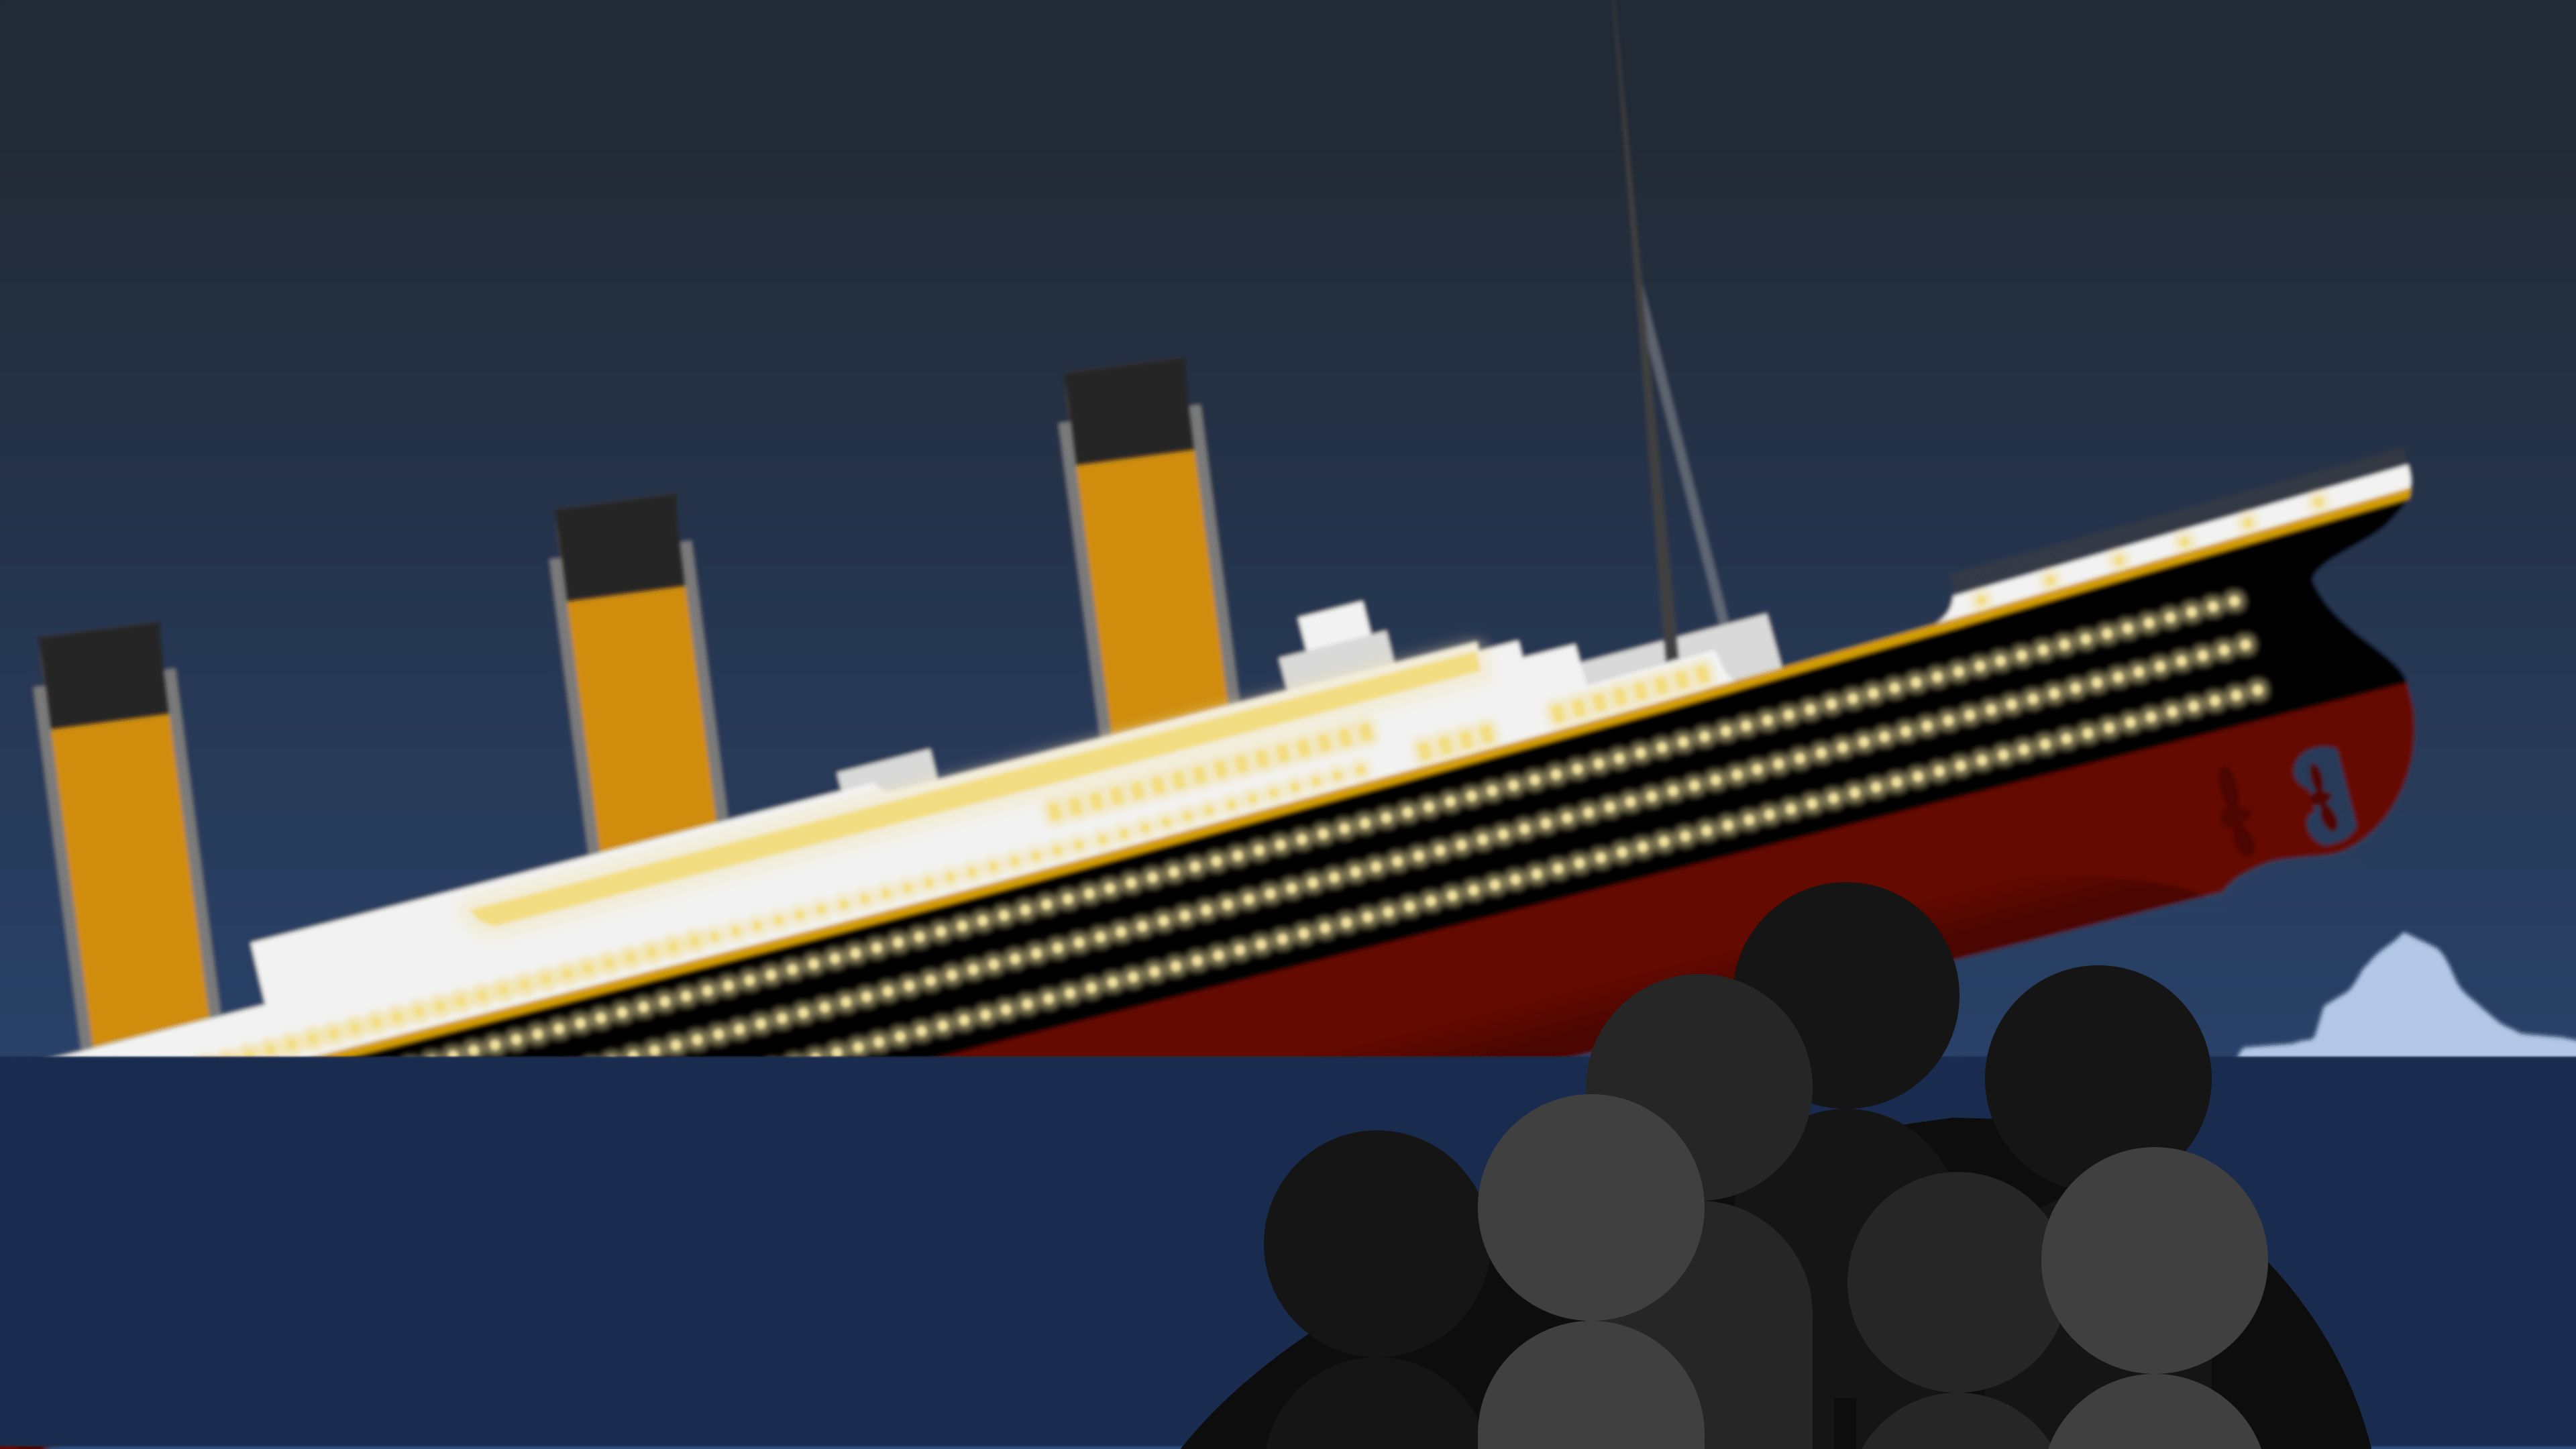 A sinking RMS Titanic, with an iceberg in the background